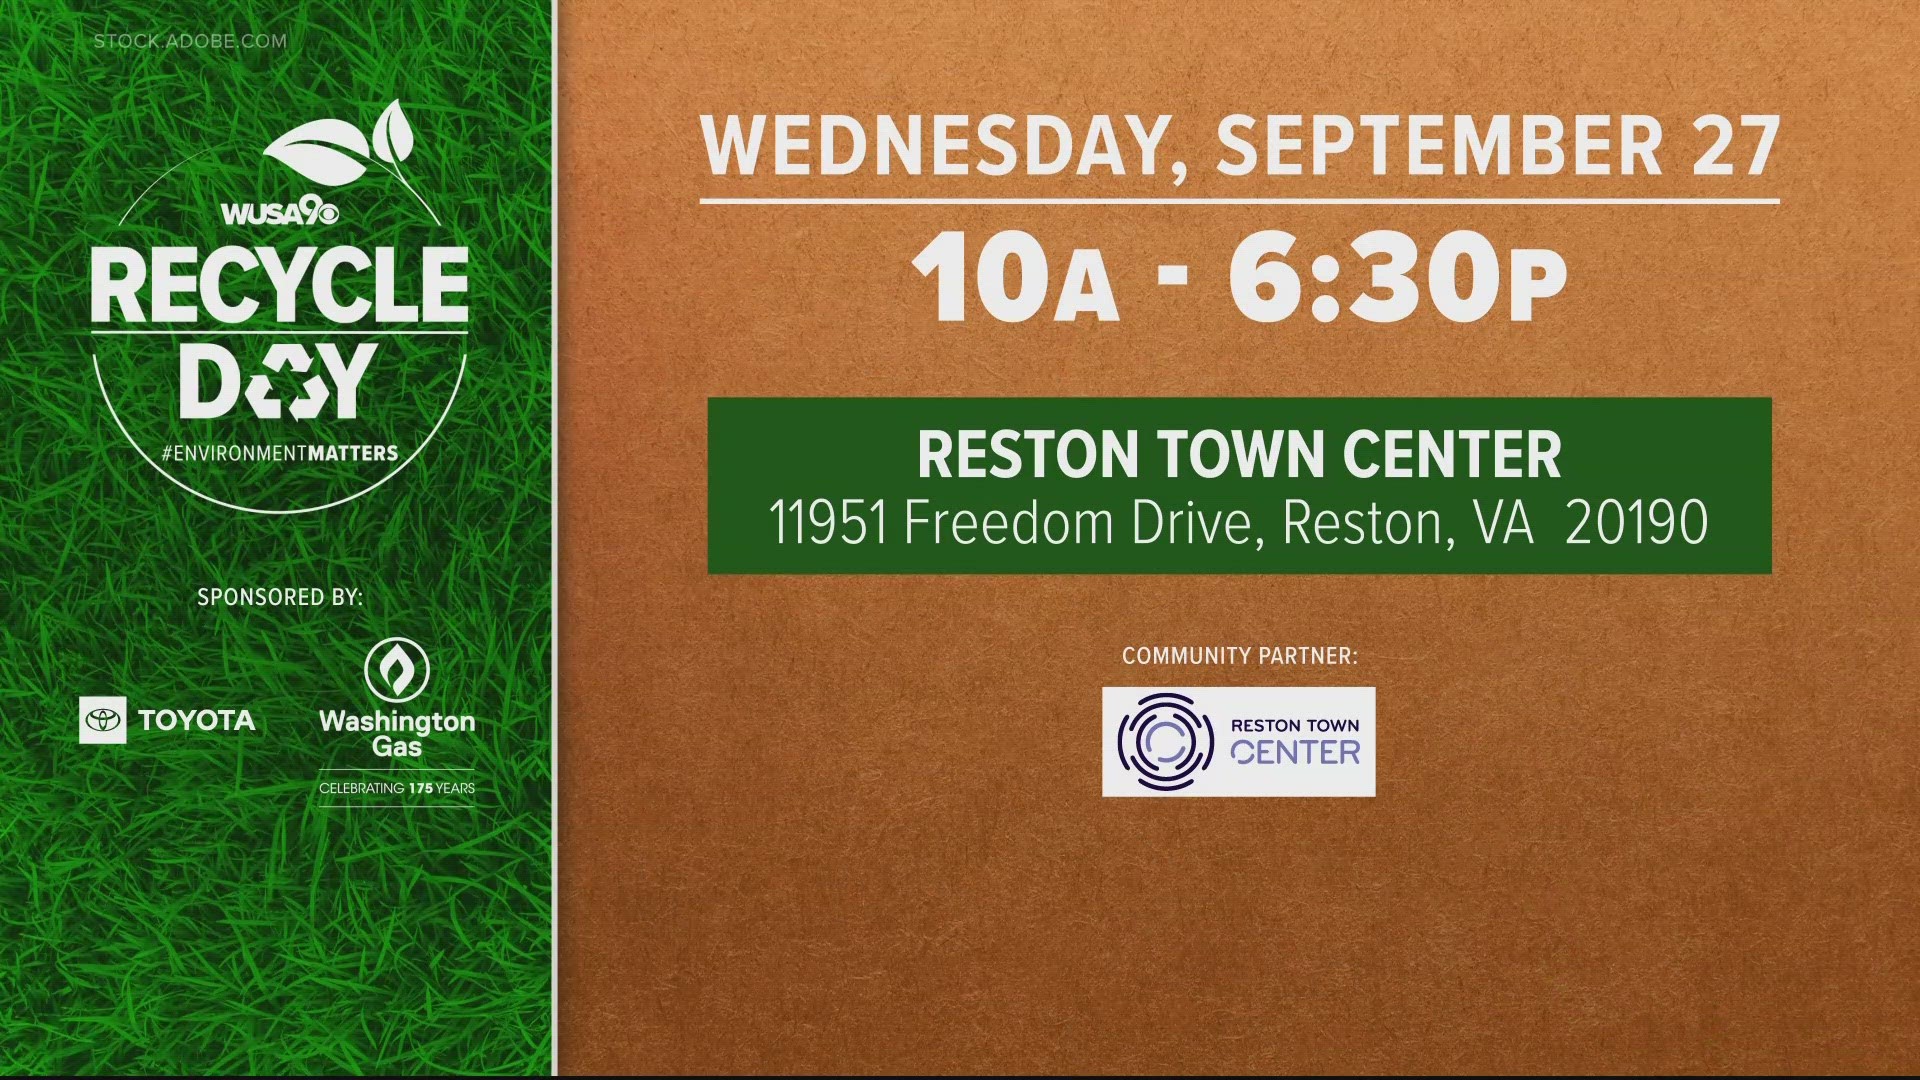 Join us next Wednesday, September 27th at the Reston Town Center. It's from 10am-6:30pm.